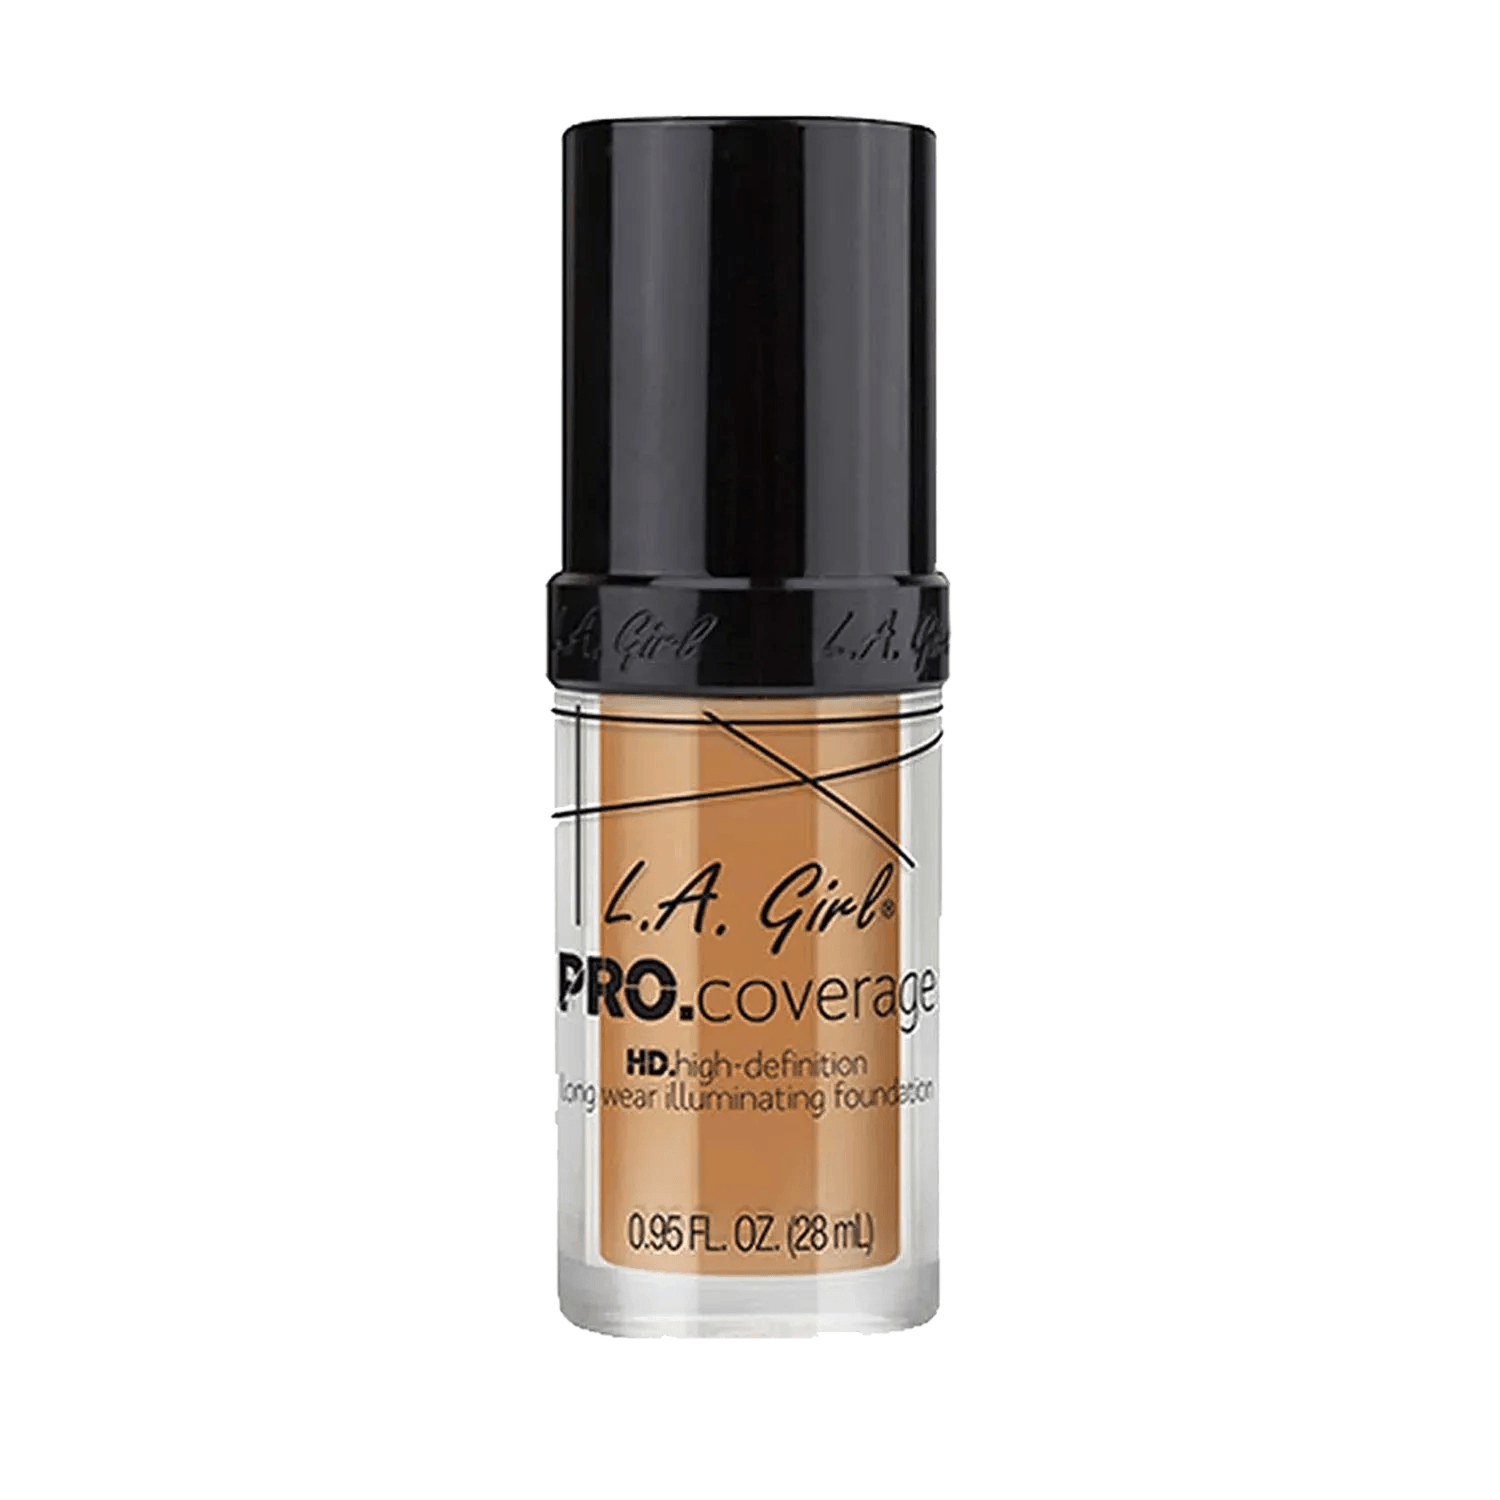 L.A. Girl | L.A. Girl PRO Coverage HD Foundation Nude Beige (28ml)